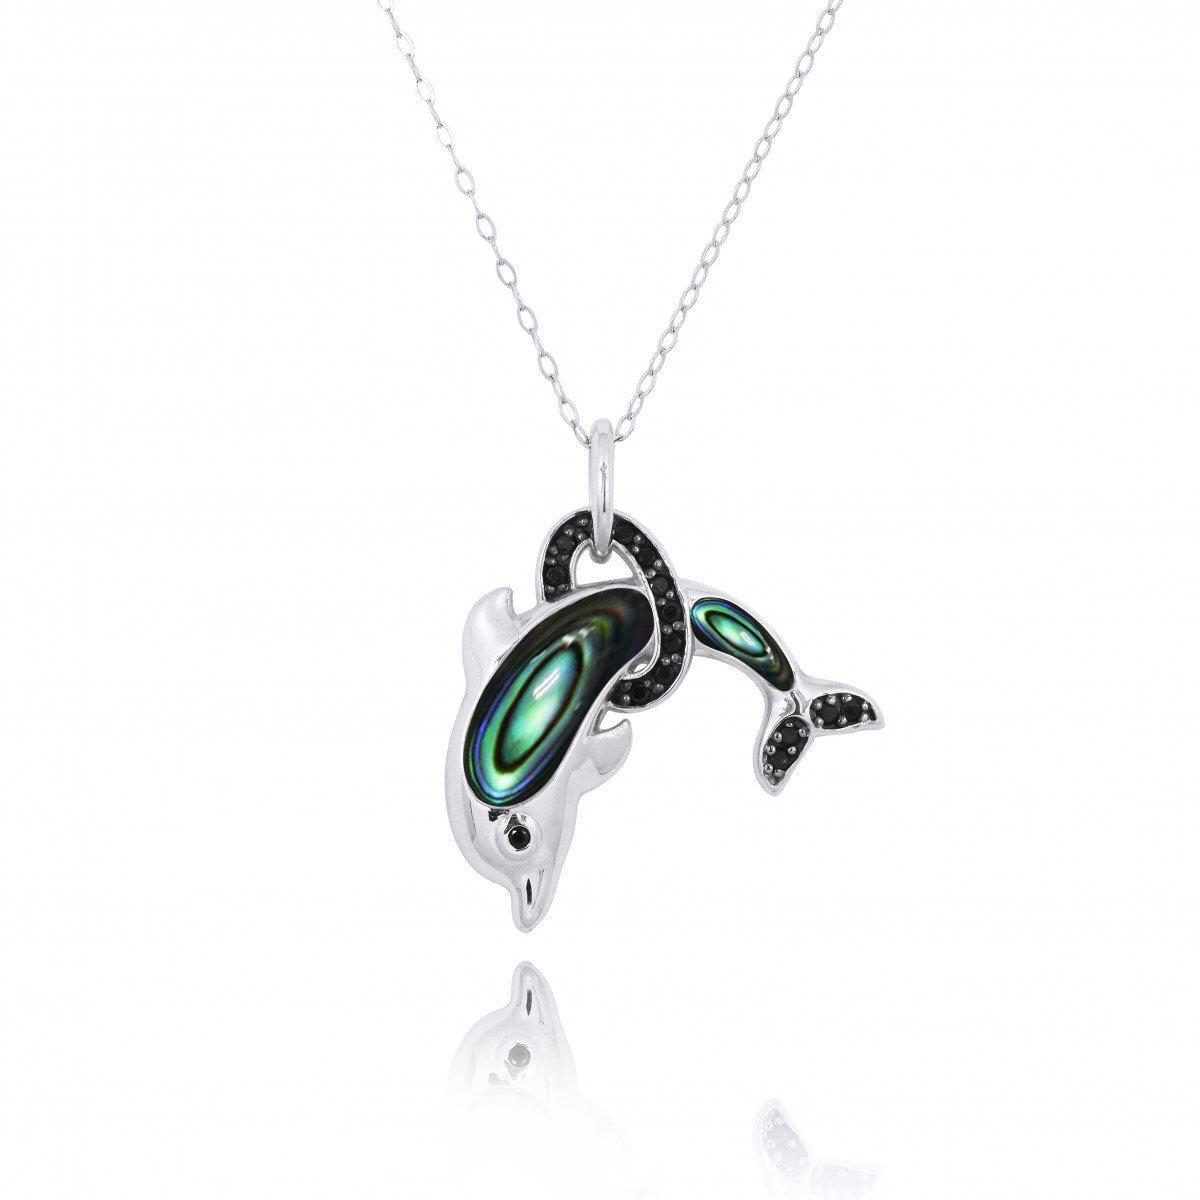 Sterling Silver Dolphin Pendant Necklace with Abalone Shell and Black Spinel